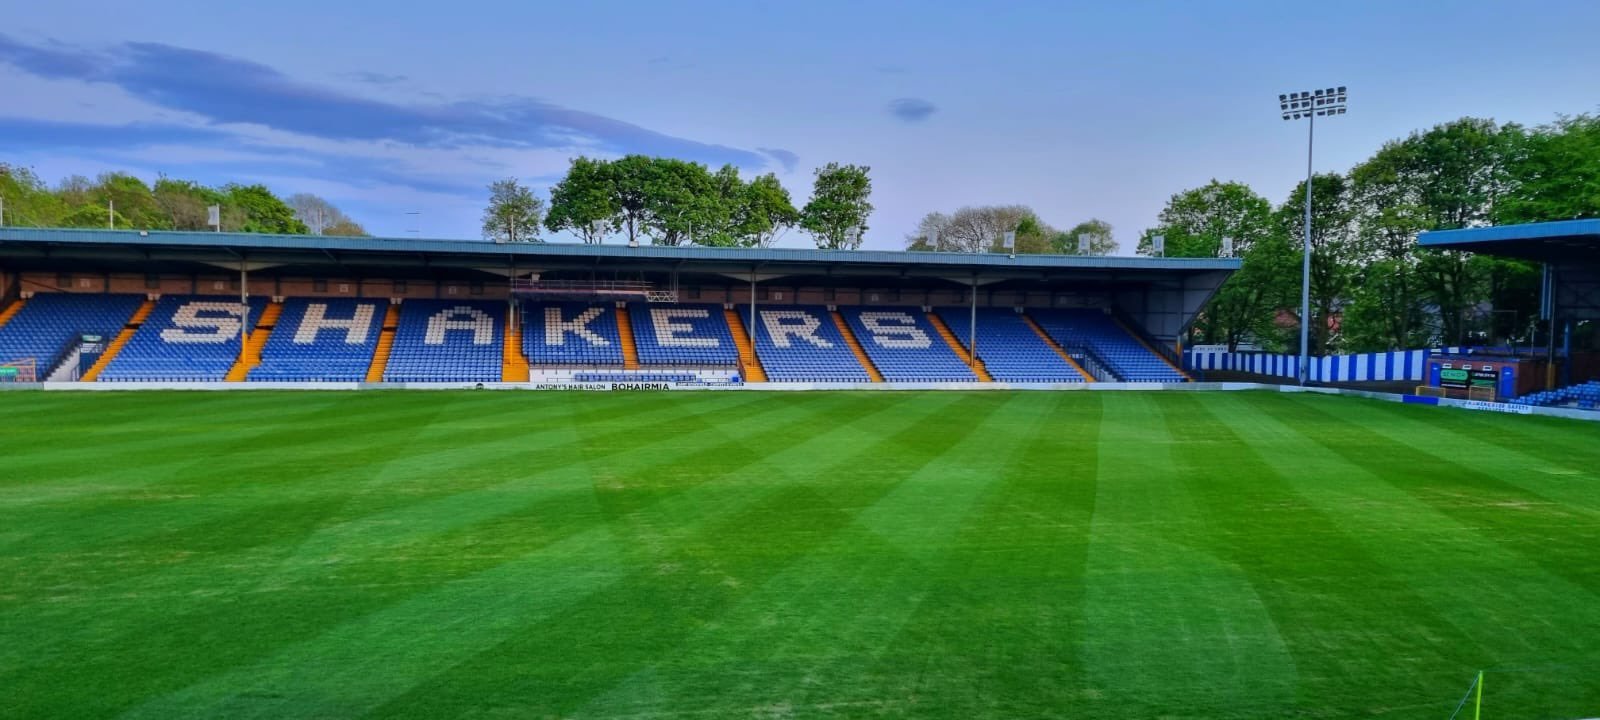 More information about "Update from The Secretary of the Football Supporters' Society of Bury"